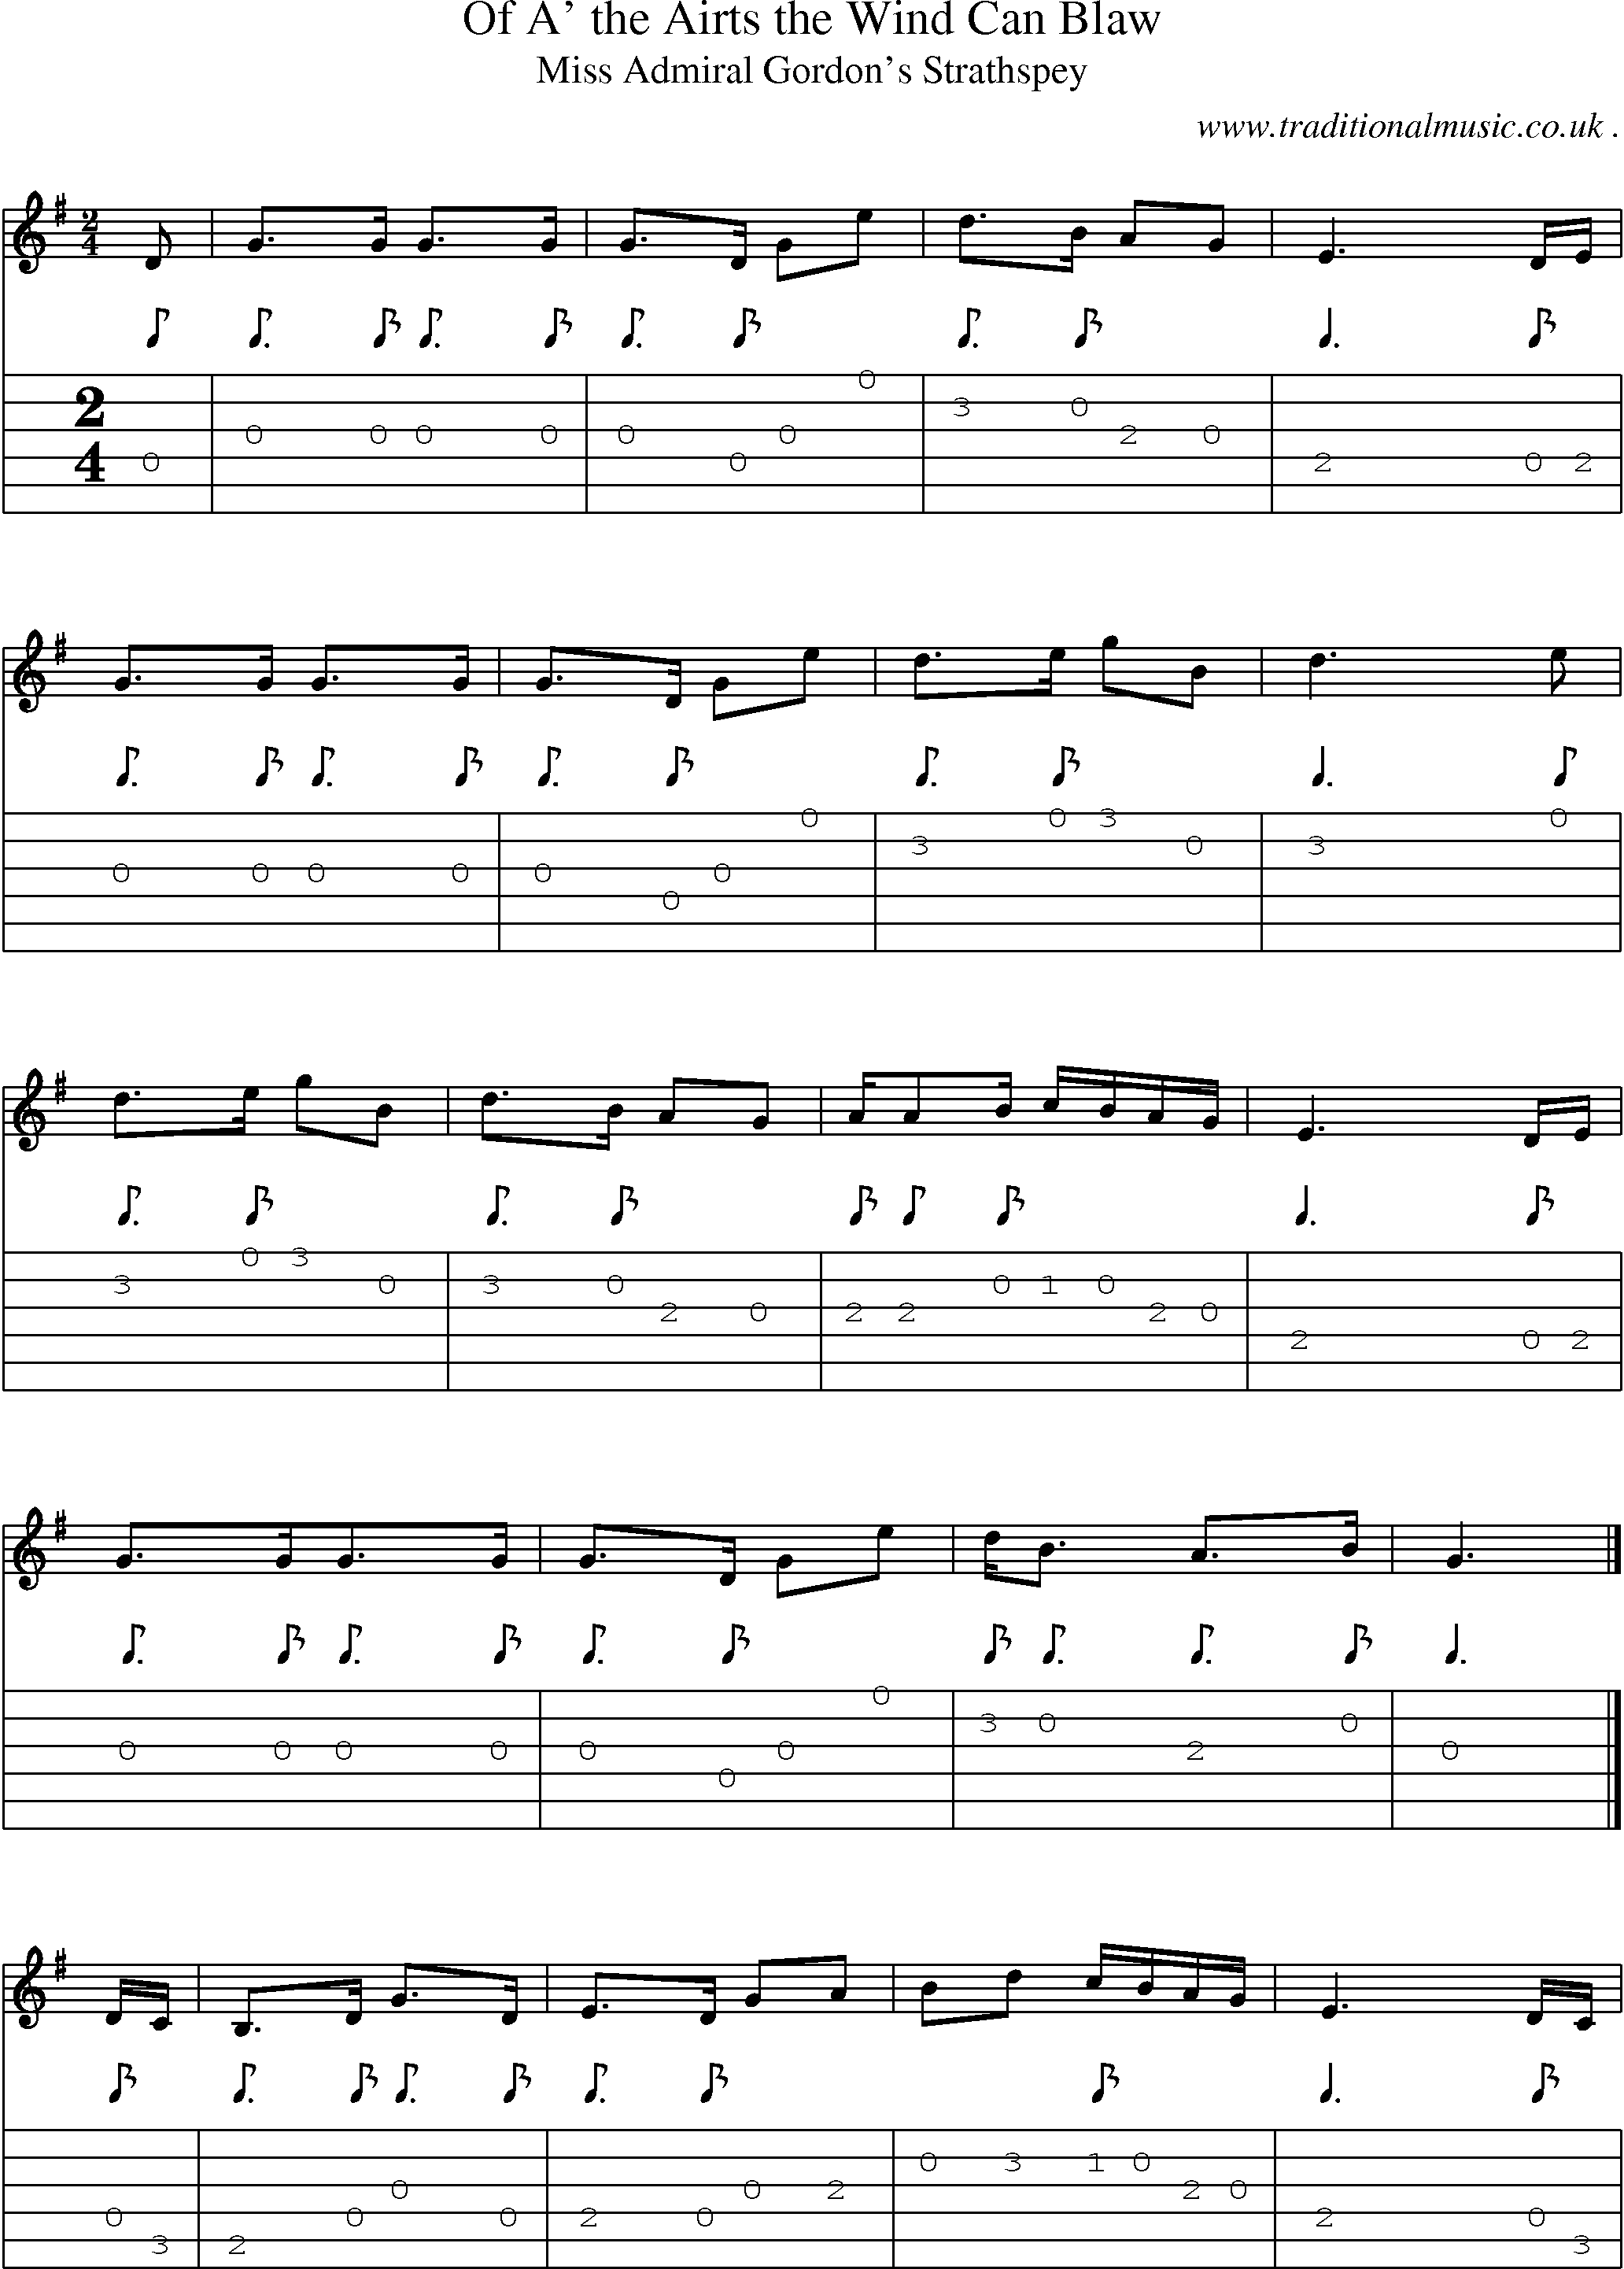 Sheet-music  score, Chords and Guitar Tabs for Of A The Airts The Wind Can Blaw